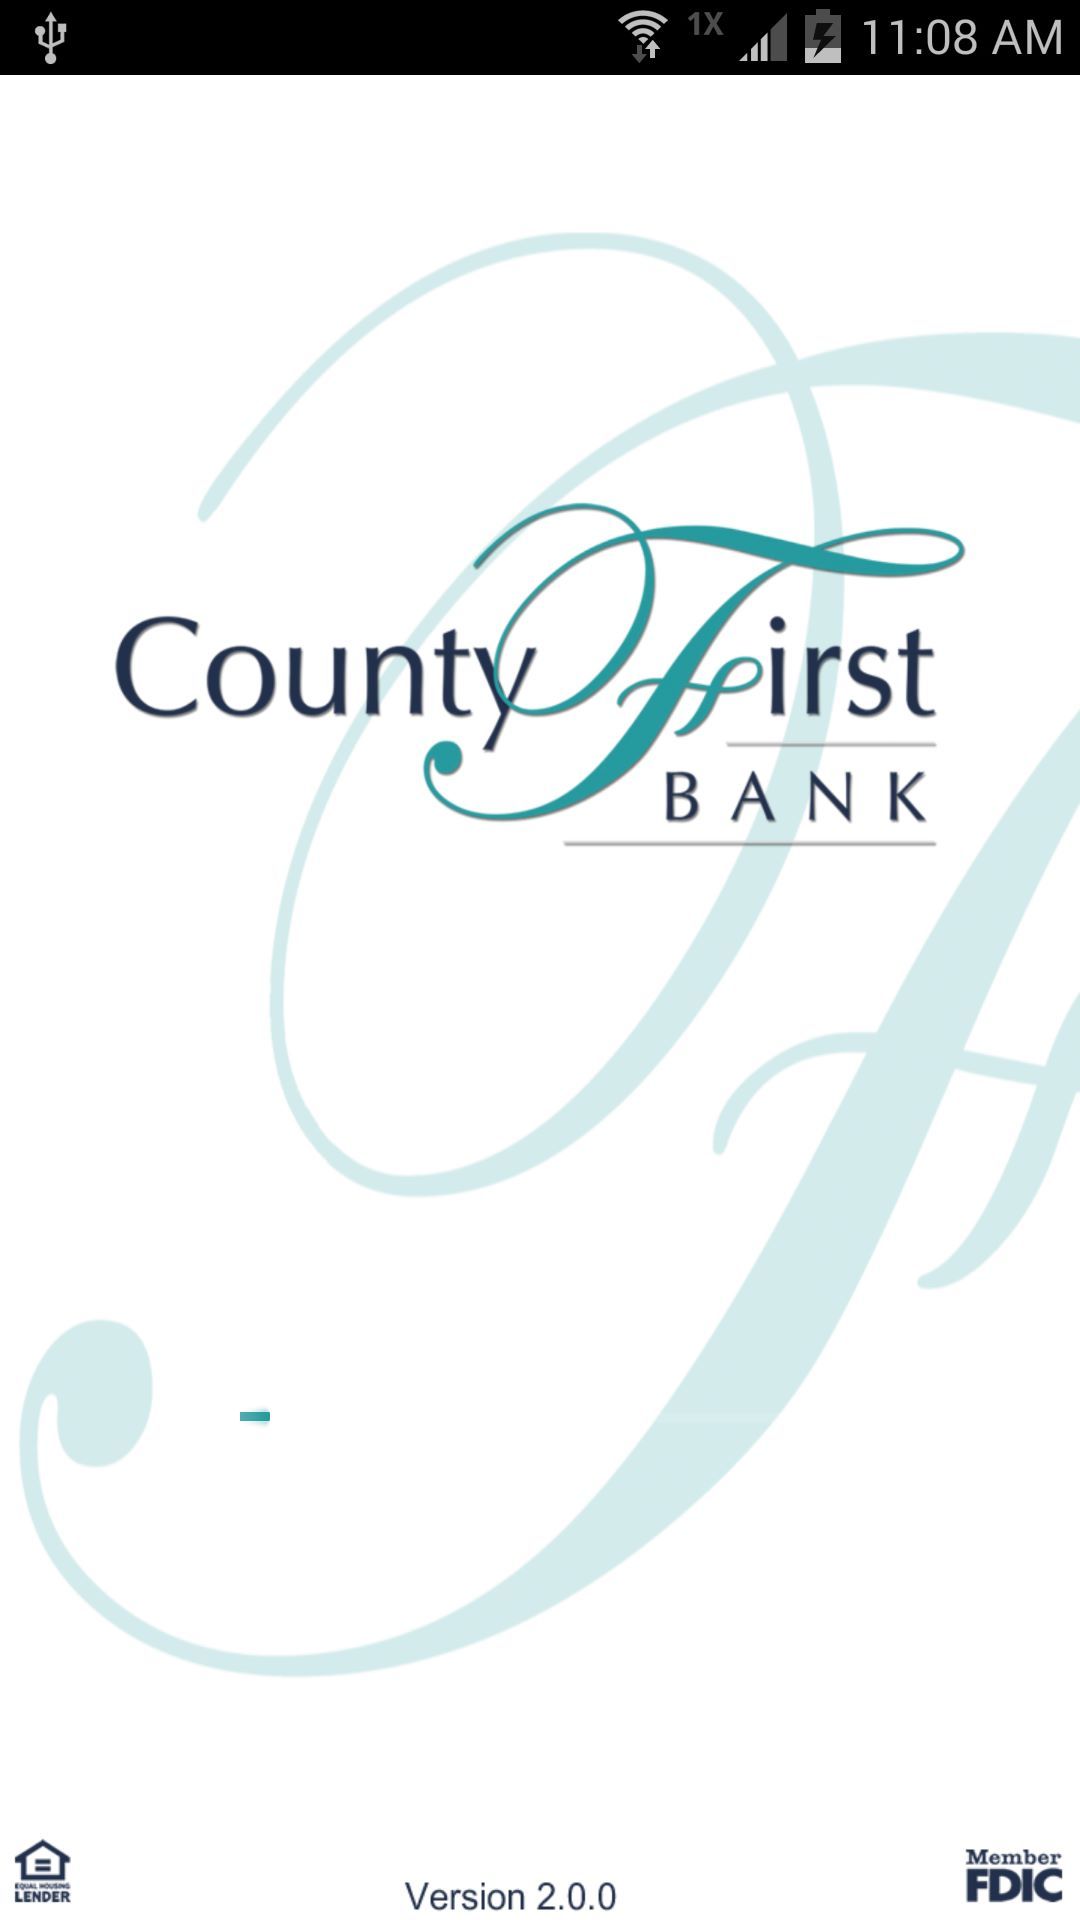 County First Bank Mobile Banking App